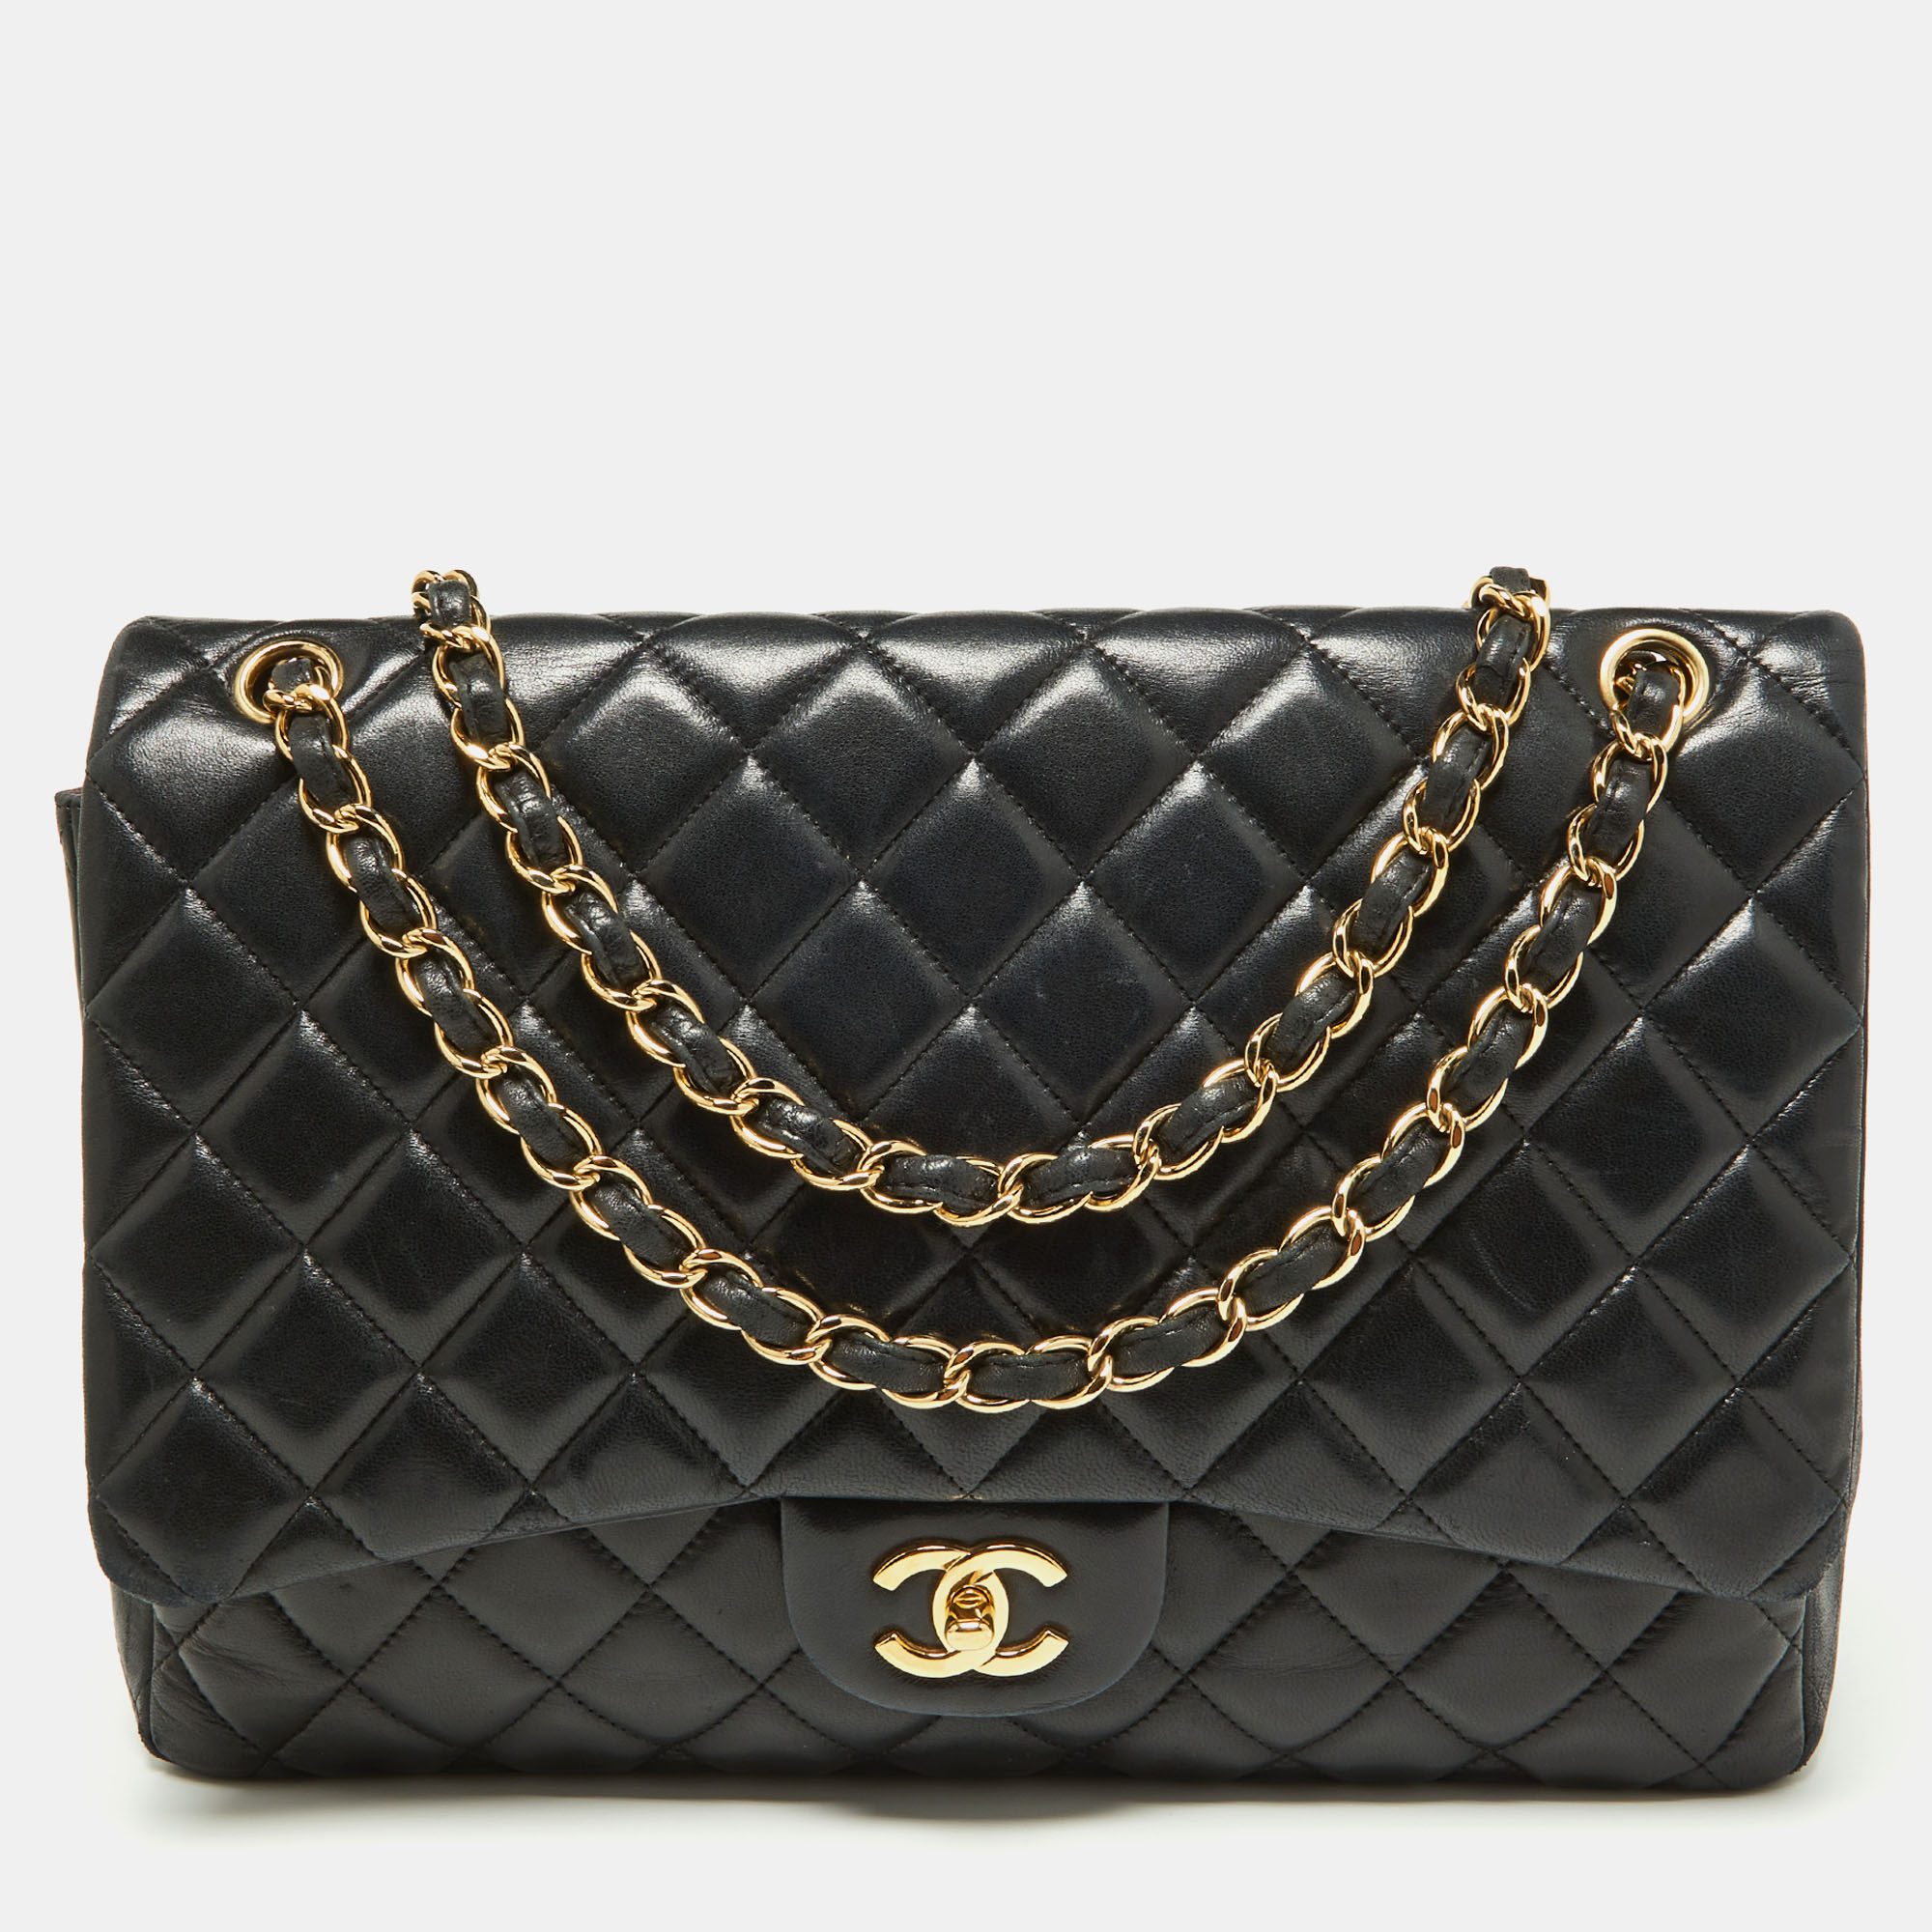 red chanel quilted bag